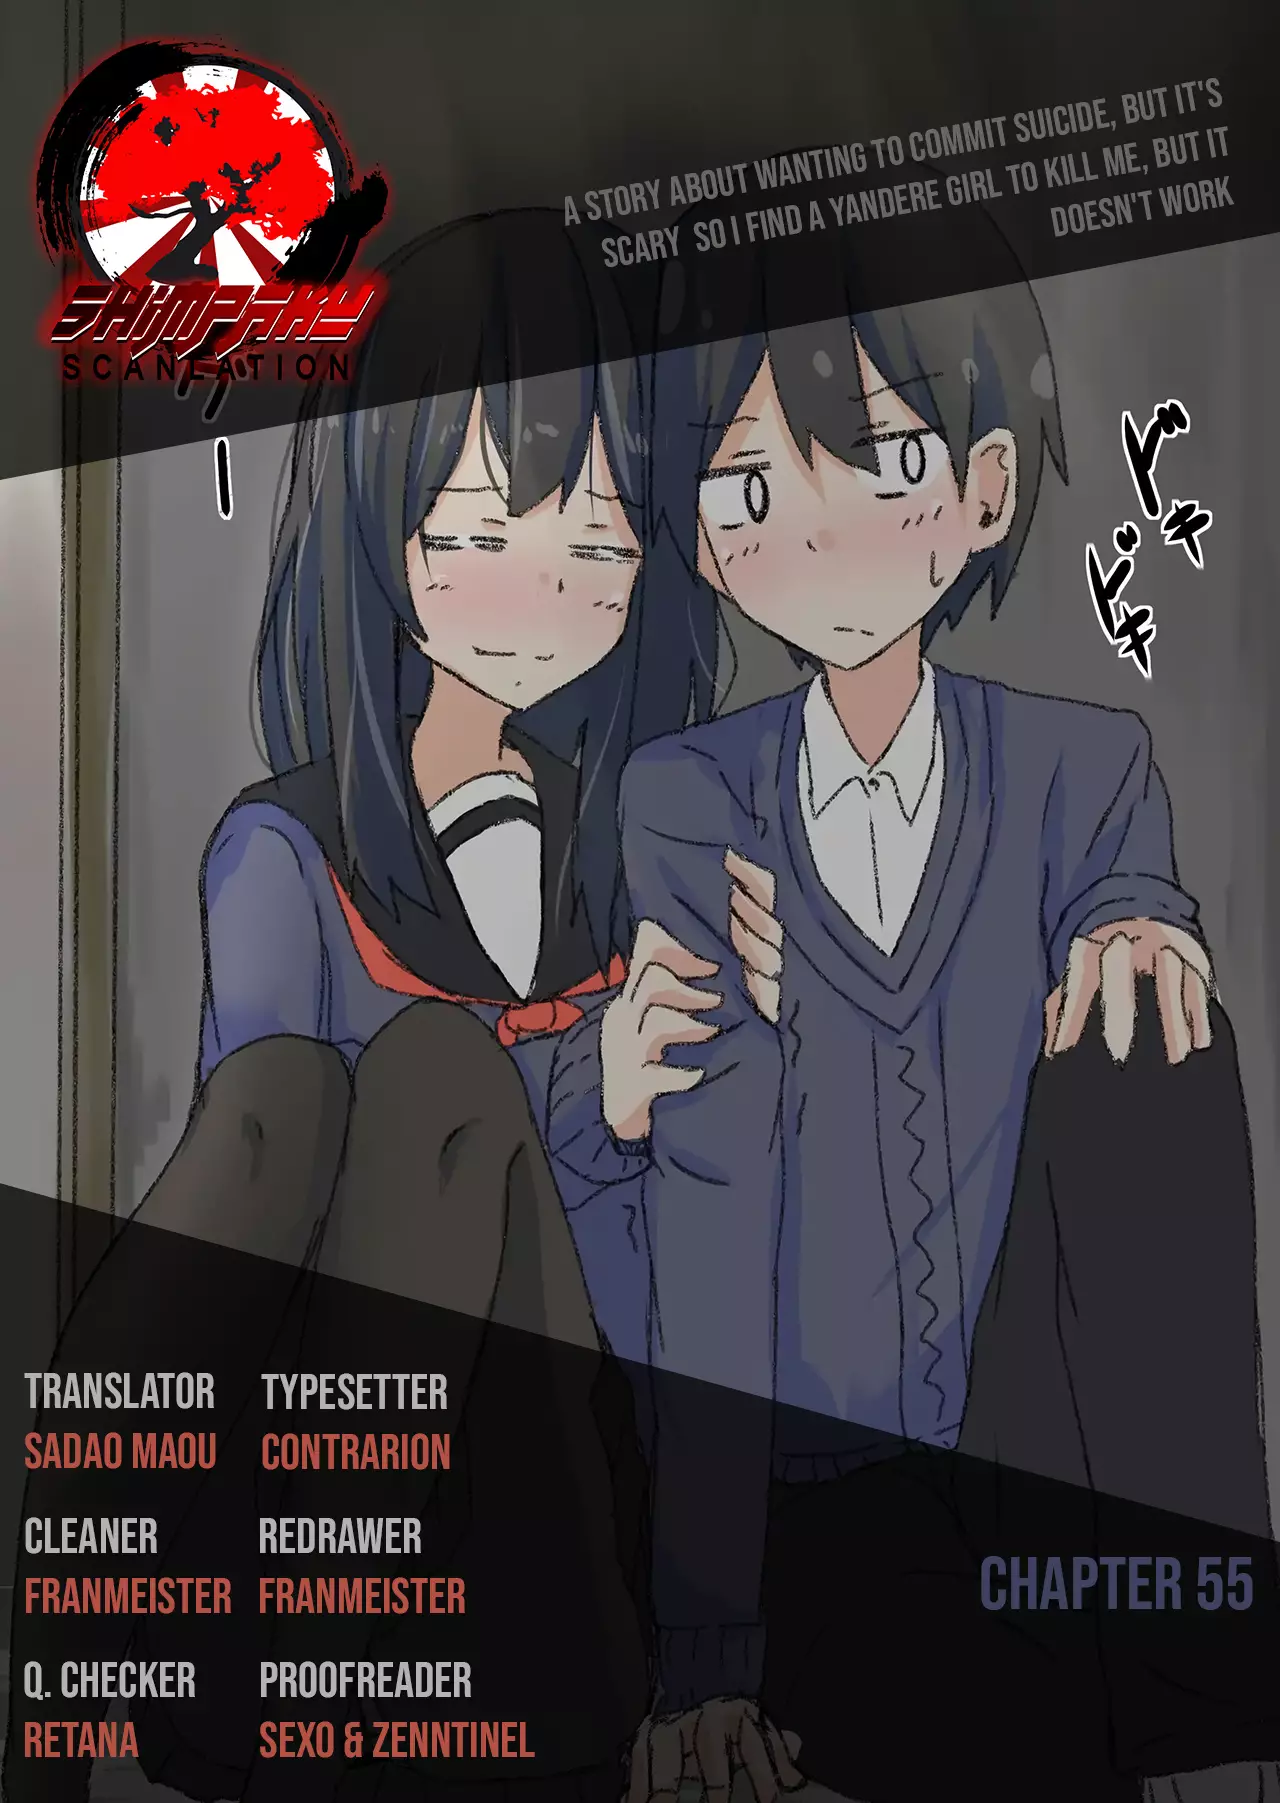 A Story About Wanting To Commit Suicide, But It's Scary So I Find A Yandere Girl To Kill Me, But It Doesn't Work - 55 page 3-9e36463b